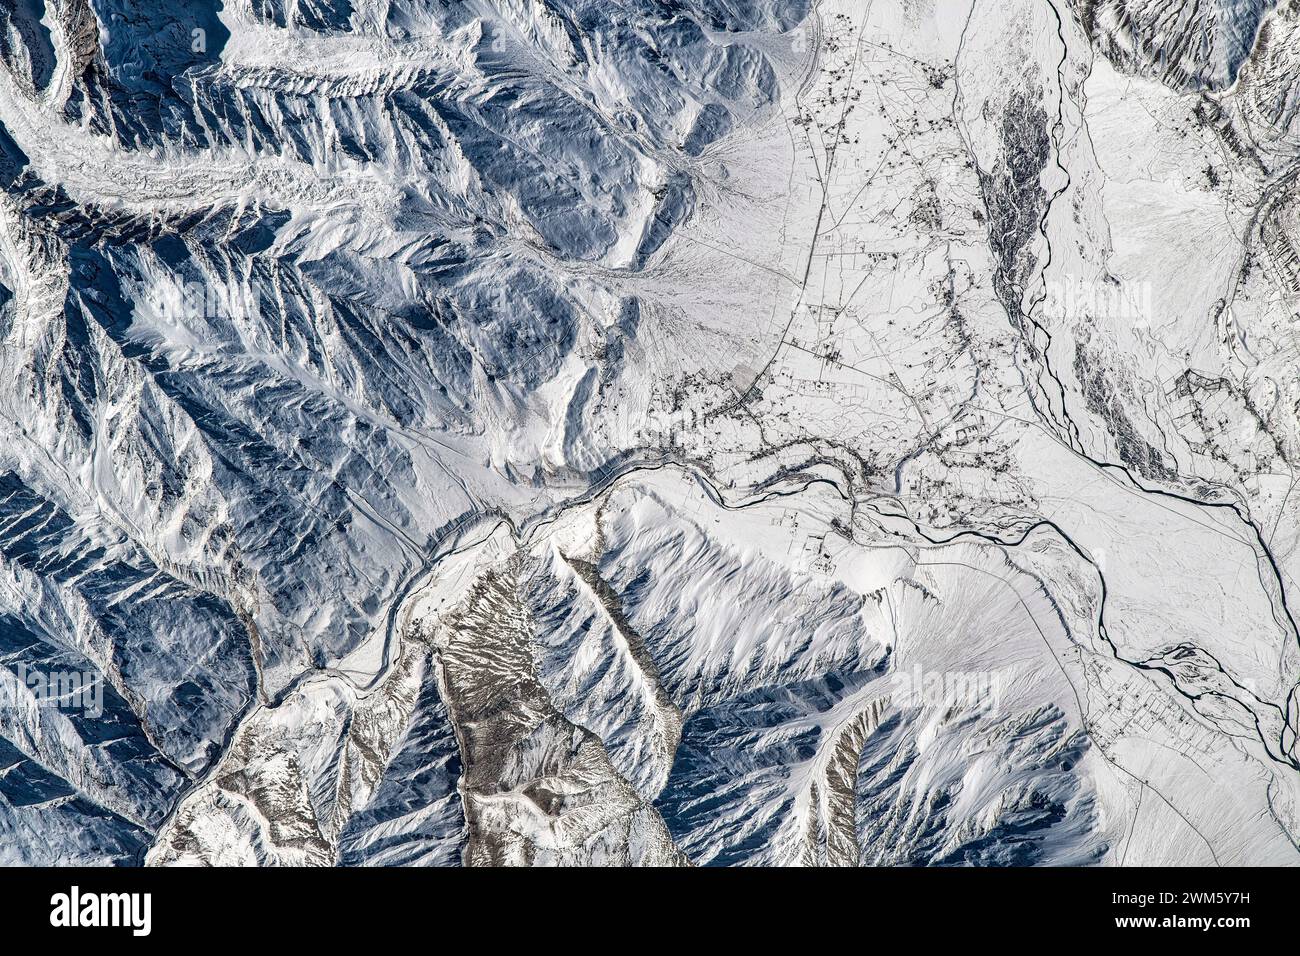 Land Feature Close To Ladakh in India. Digital enhancement of an image by NASA Stock Photo